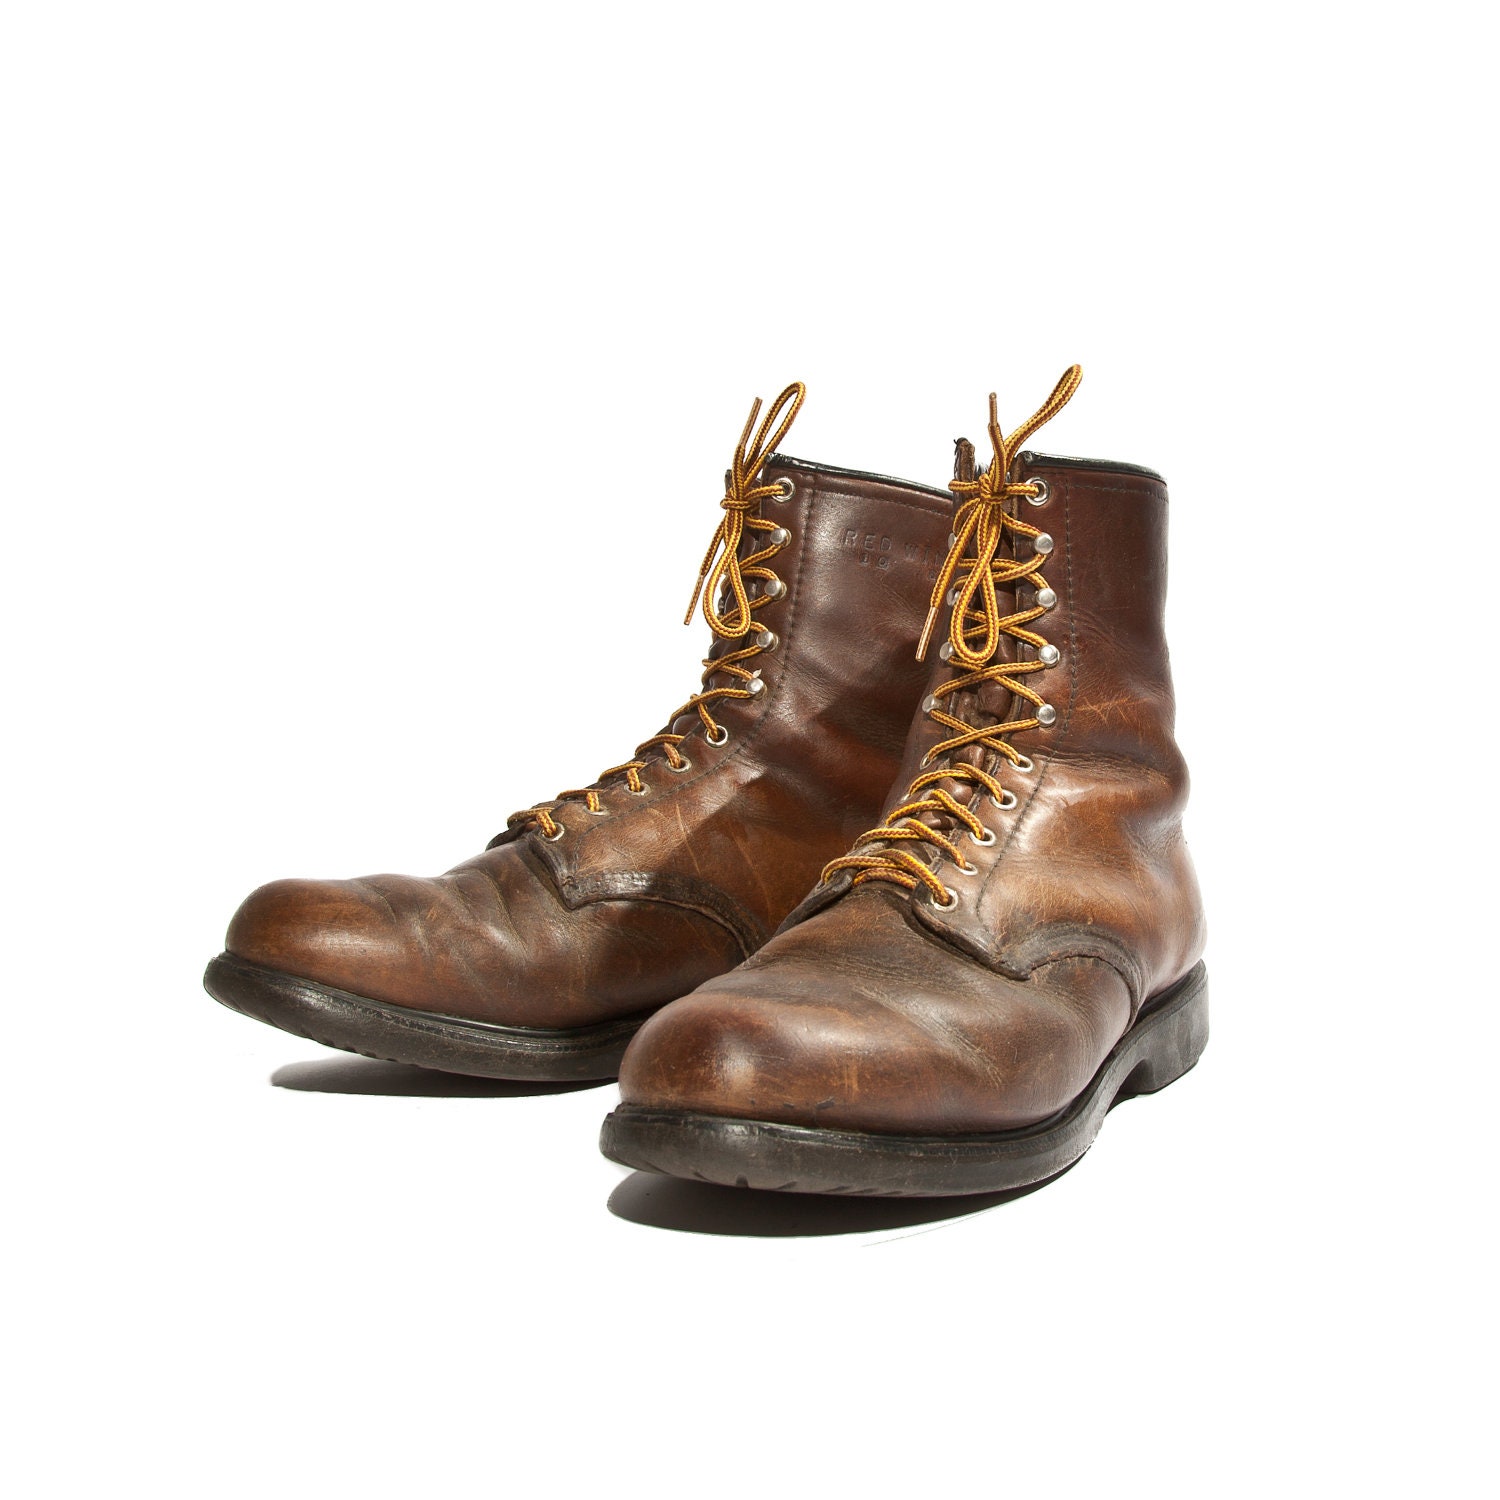 Vintage Red Wing Work Boots in a Lace Up Chukka Style for a